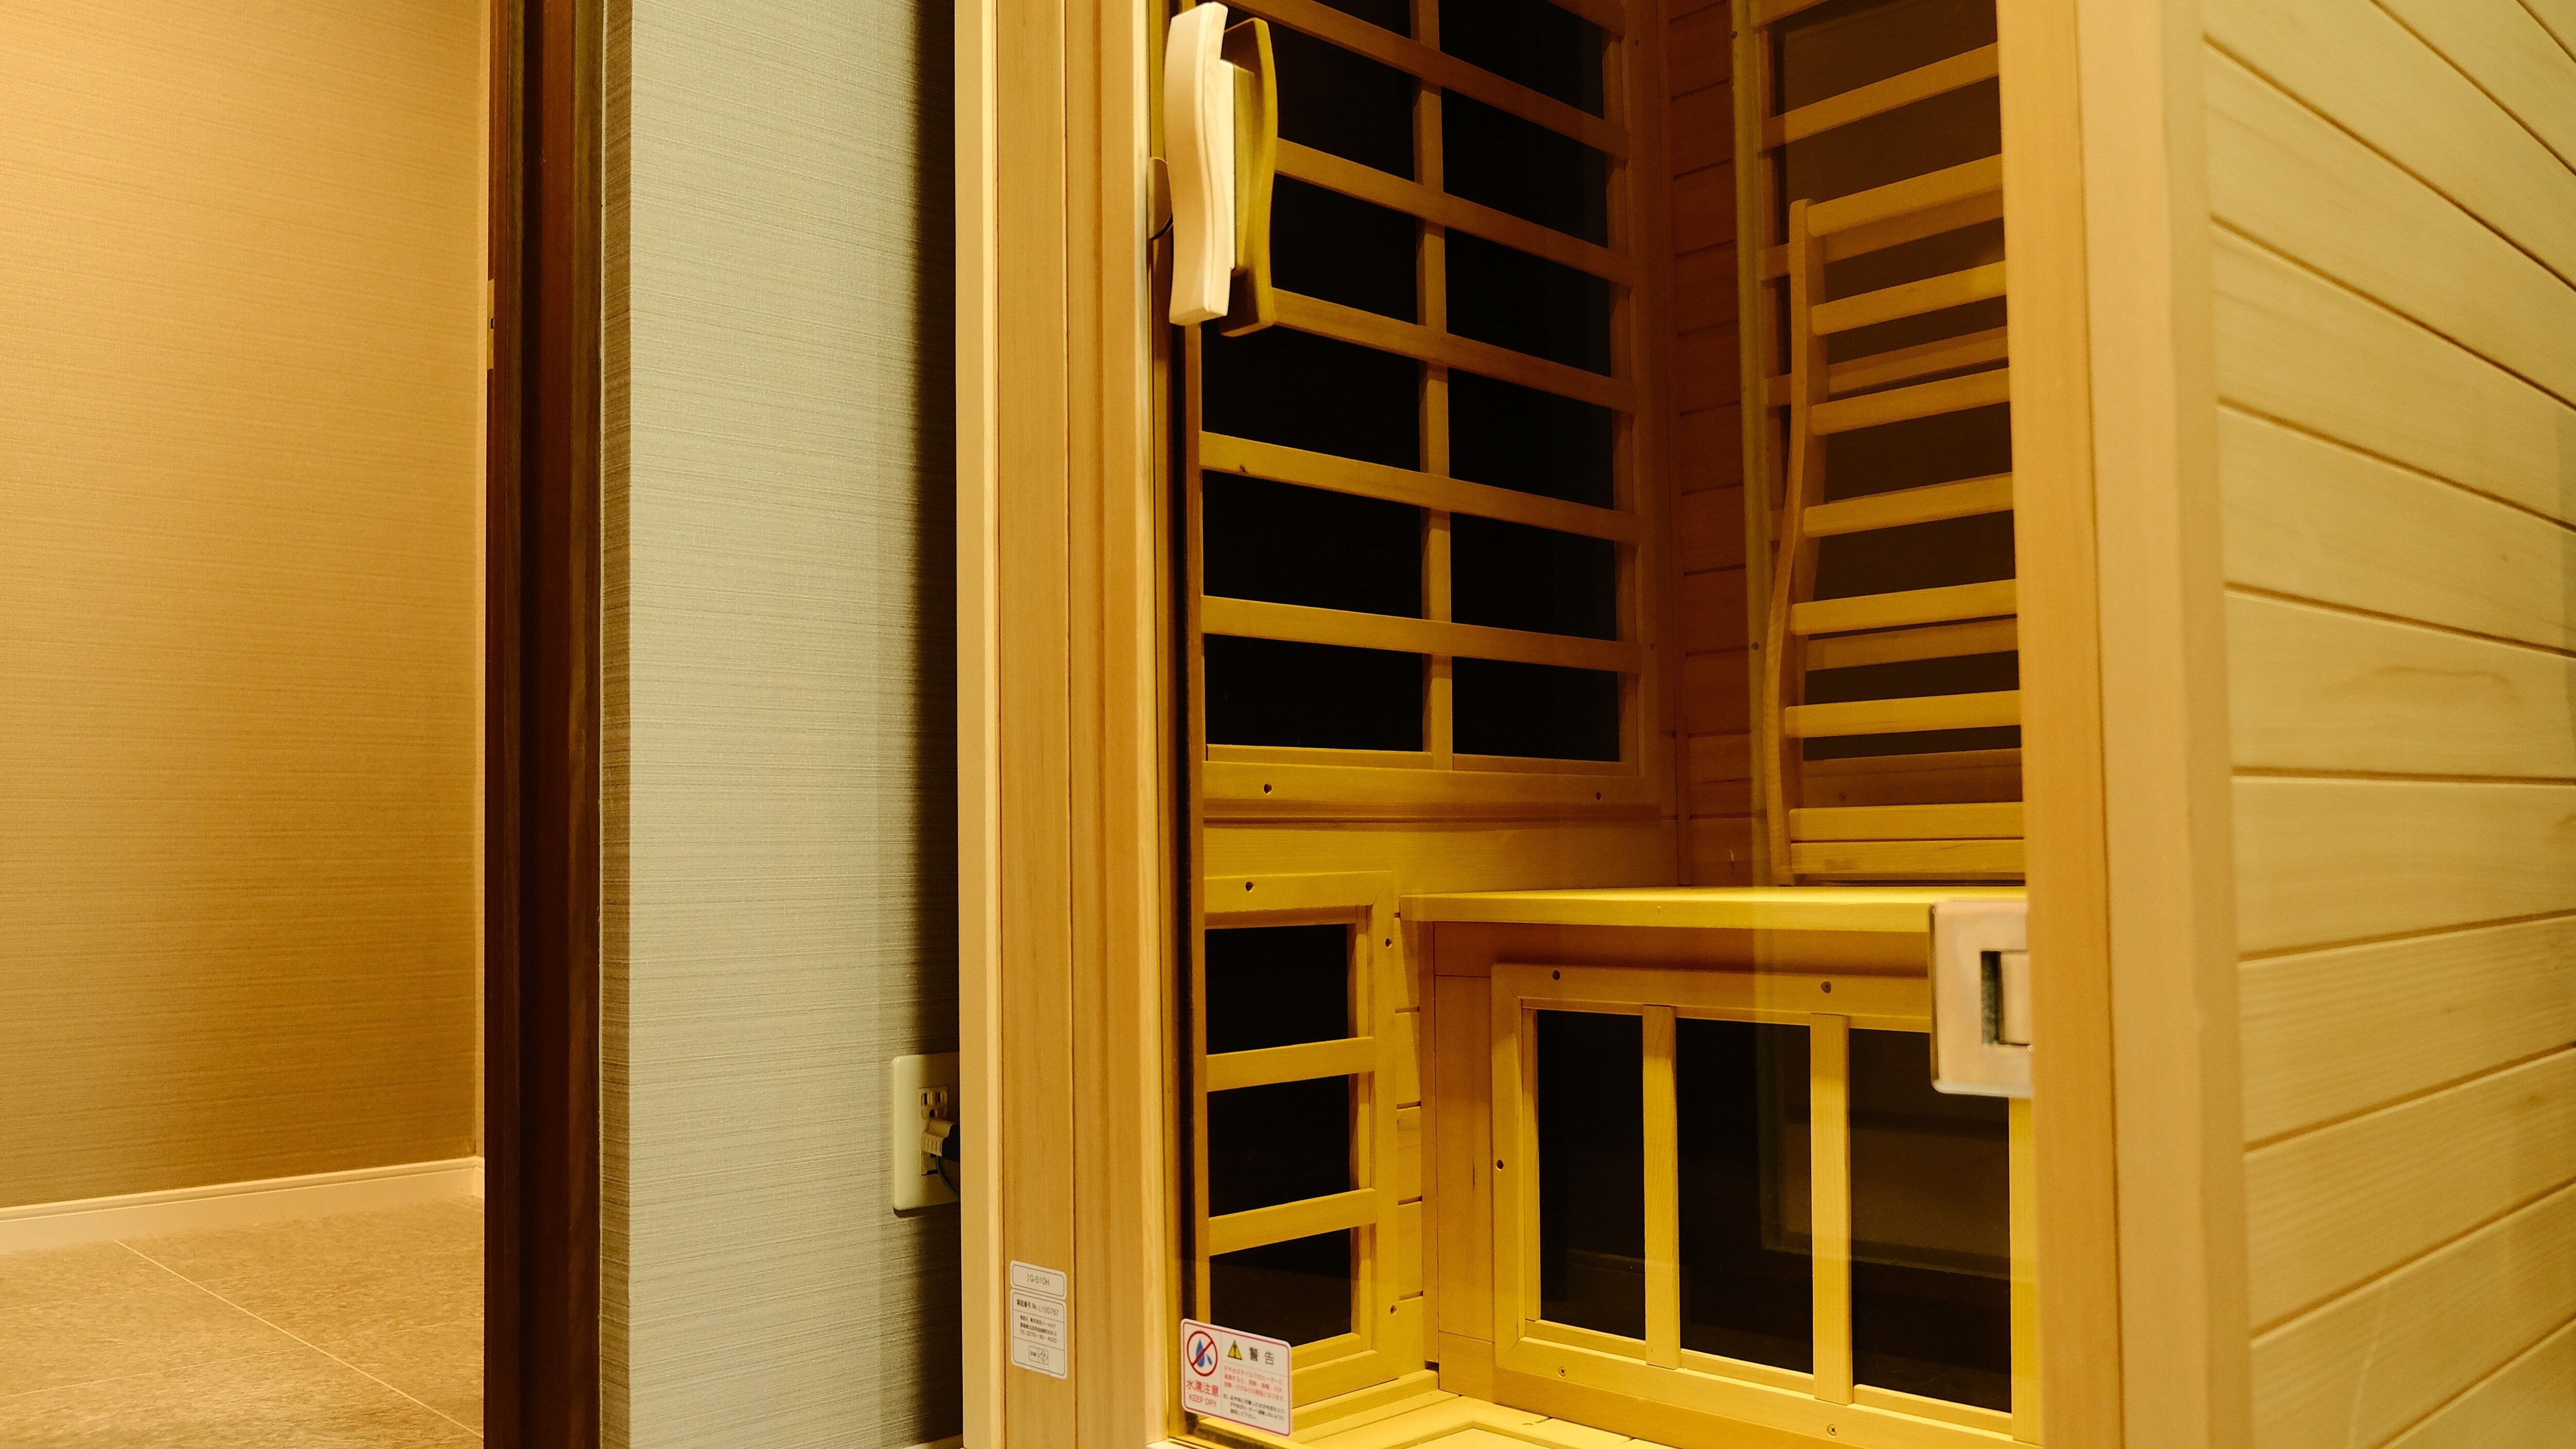 [Deluxe twin] The room is equipped with a sauna, so you can use it as much as you like at any time!